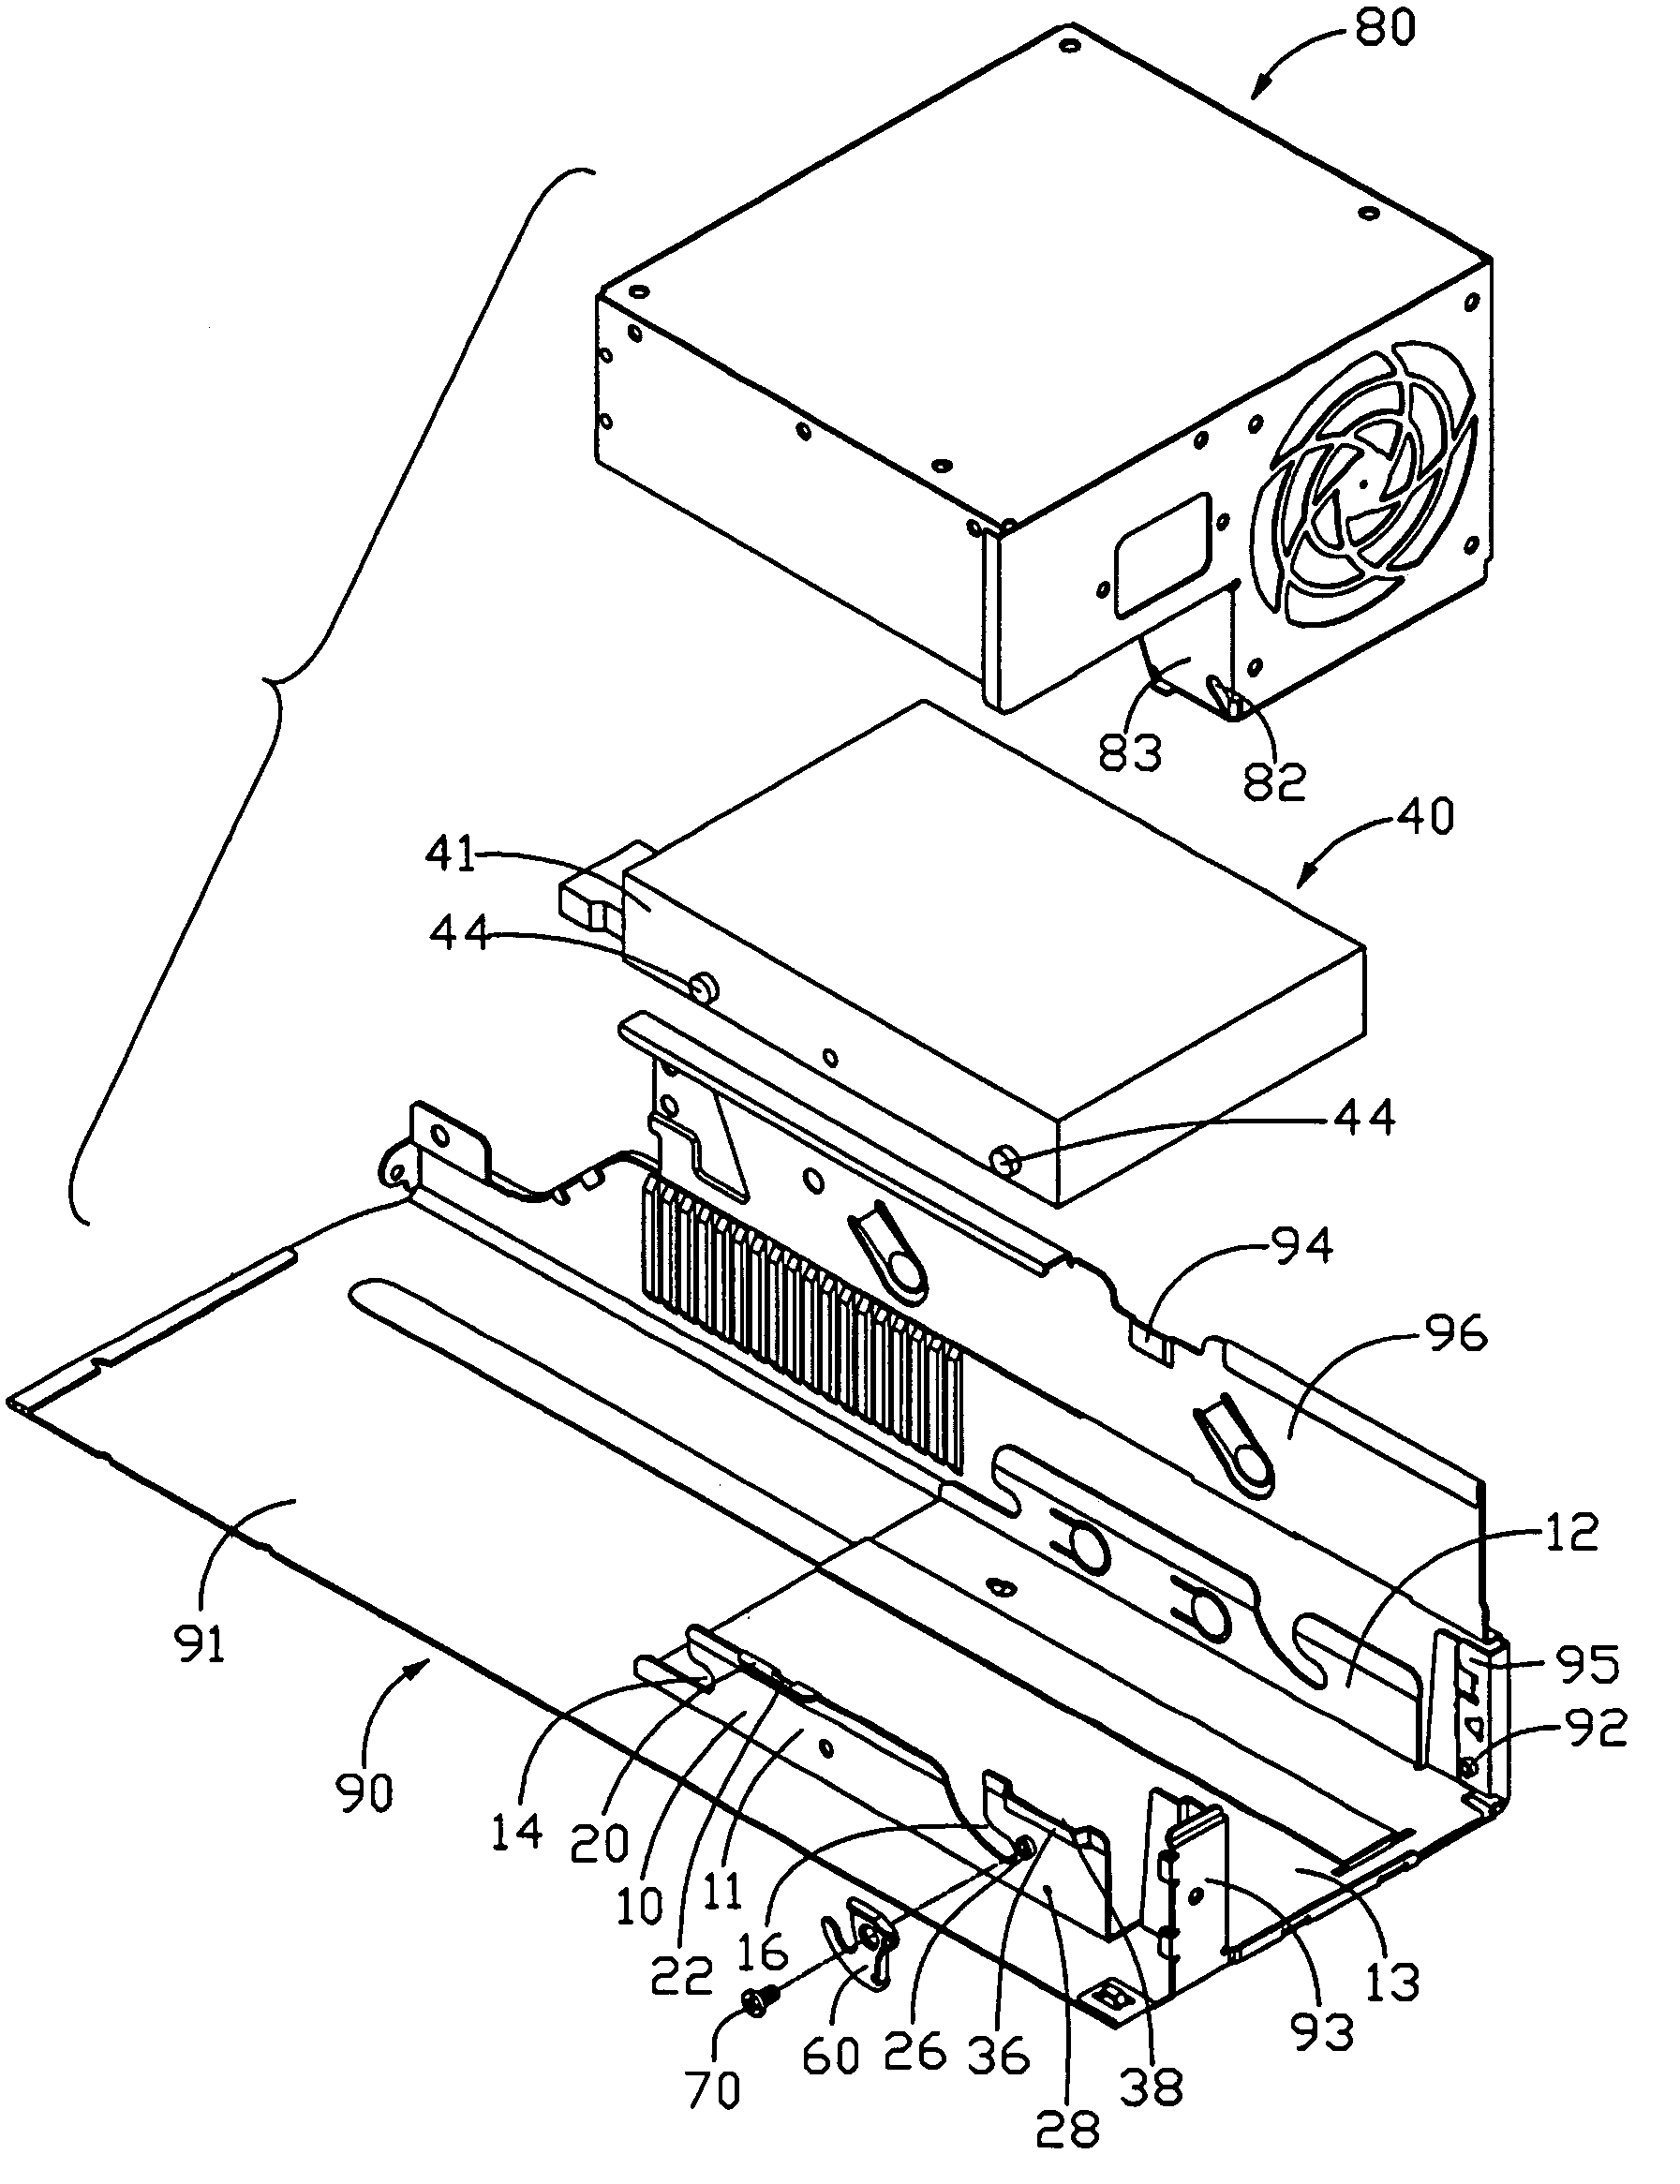 Mounting mechanism for storage device